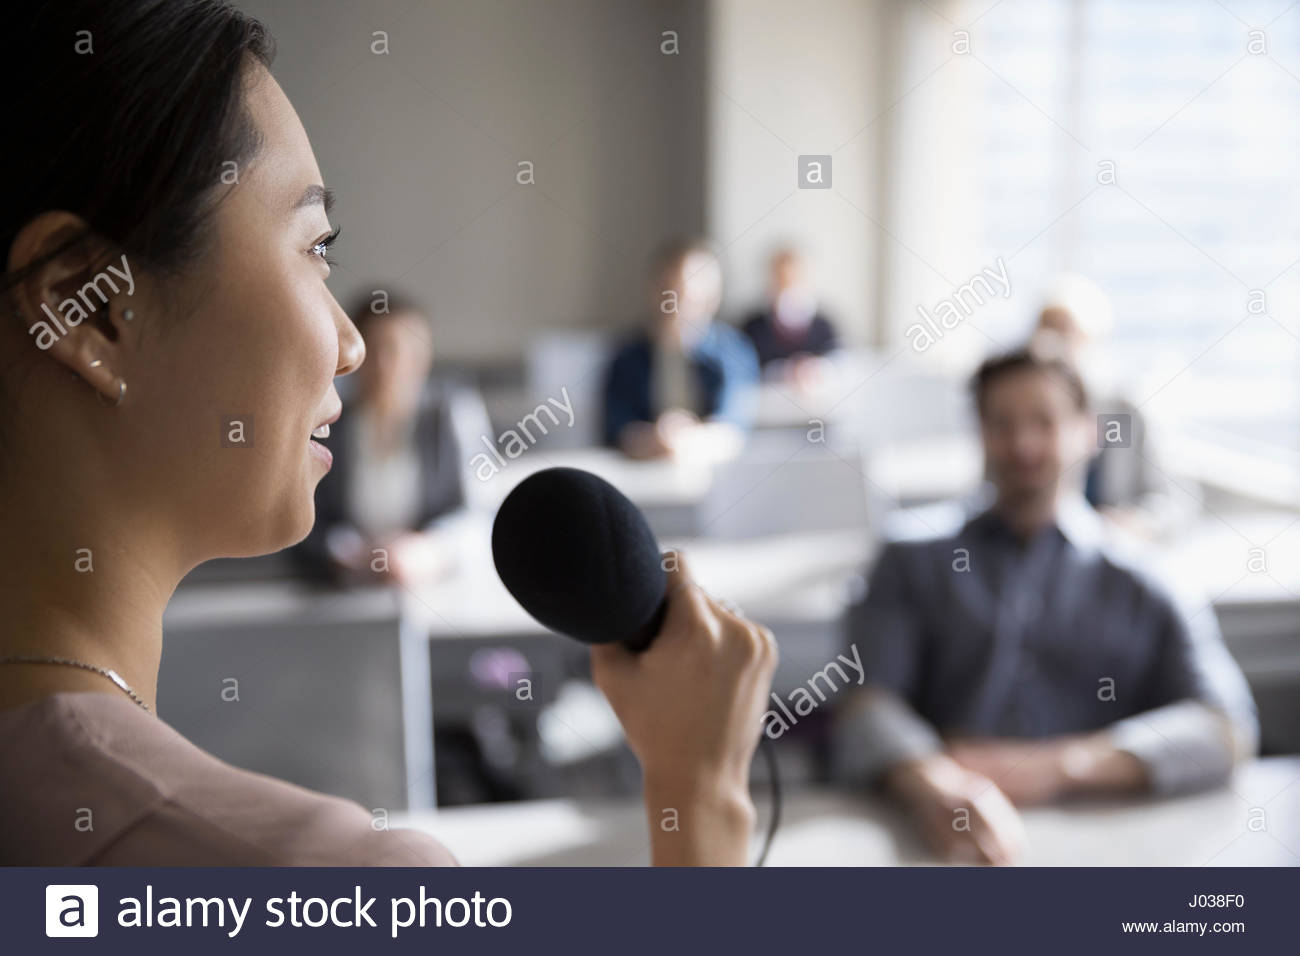 Businesswoman with microphone speaking to business people in classroom Stock Photo